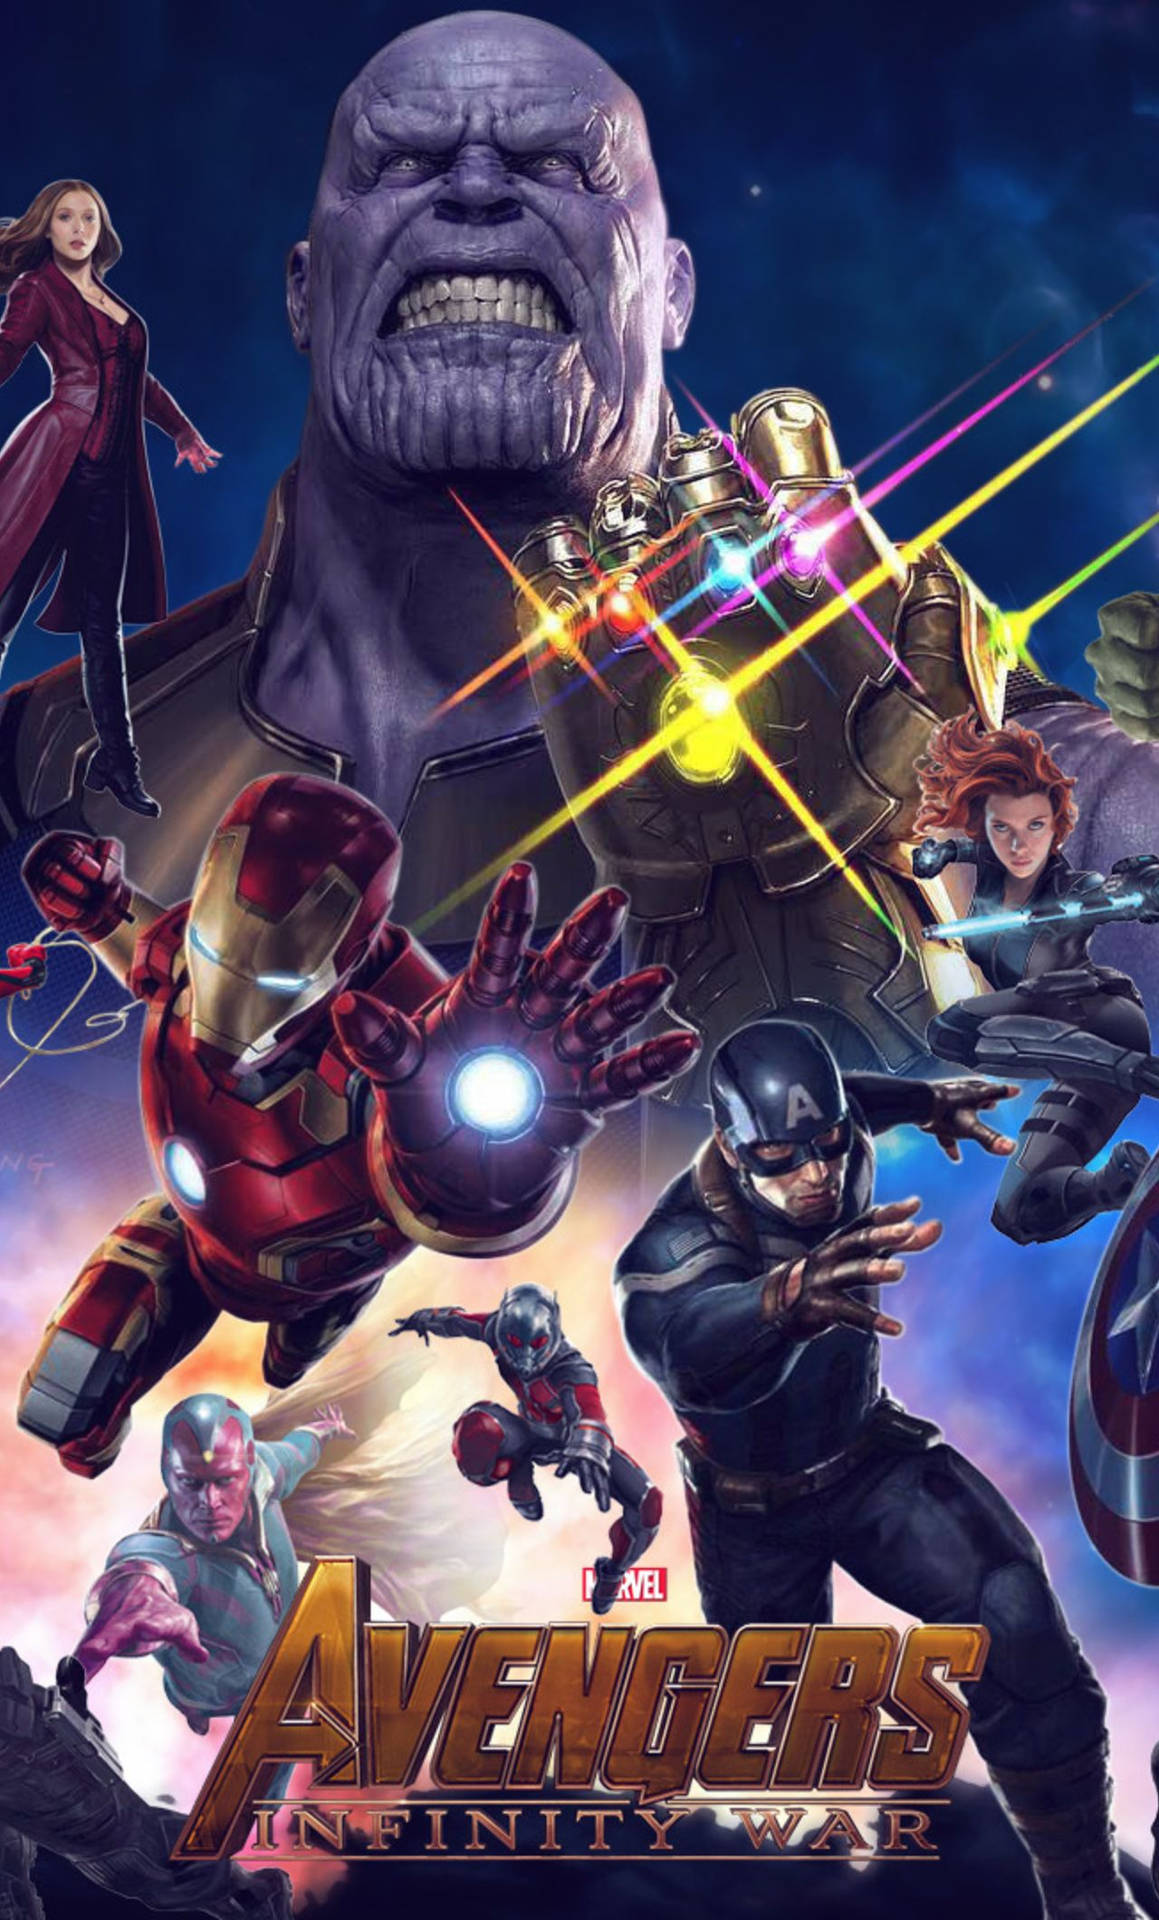 Avengers Android Infinity War Poster